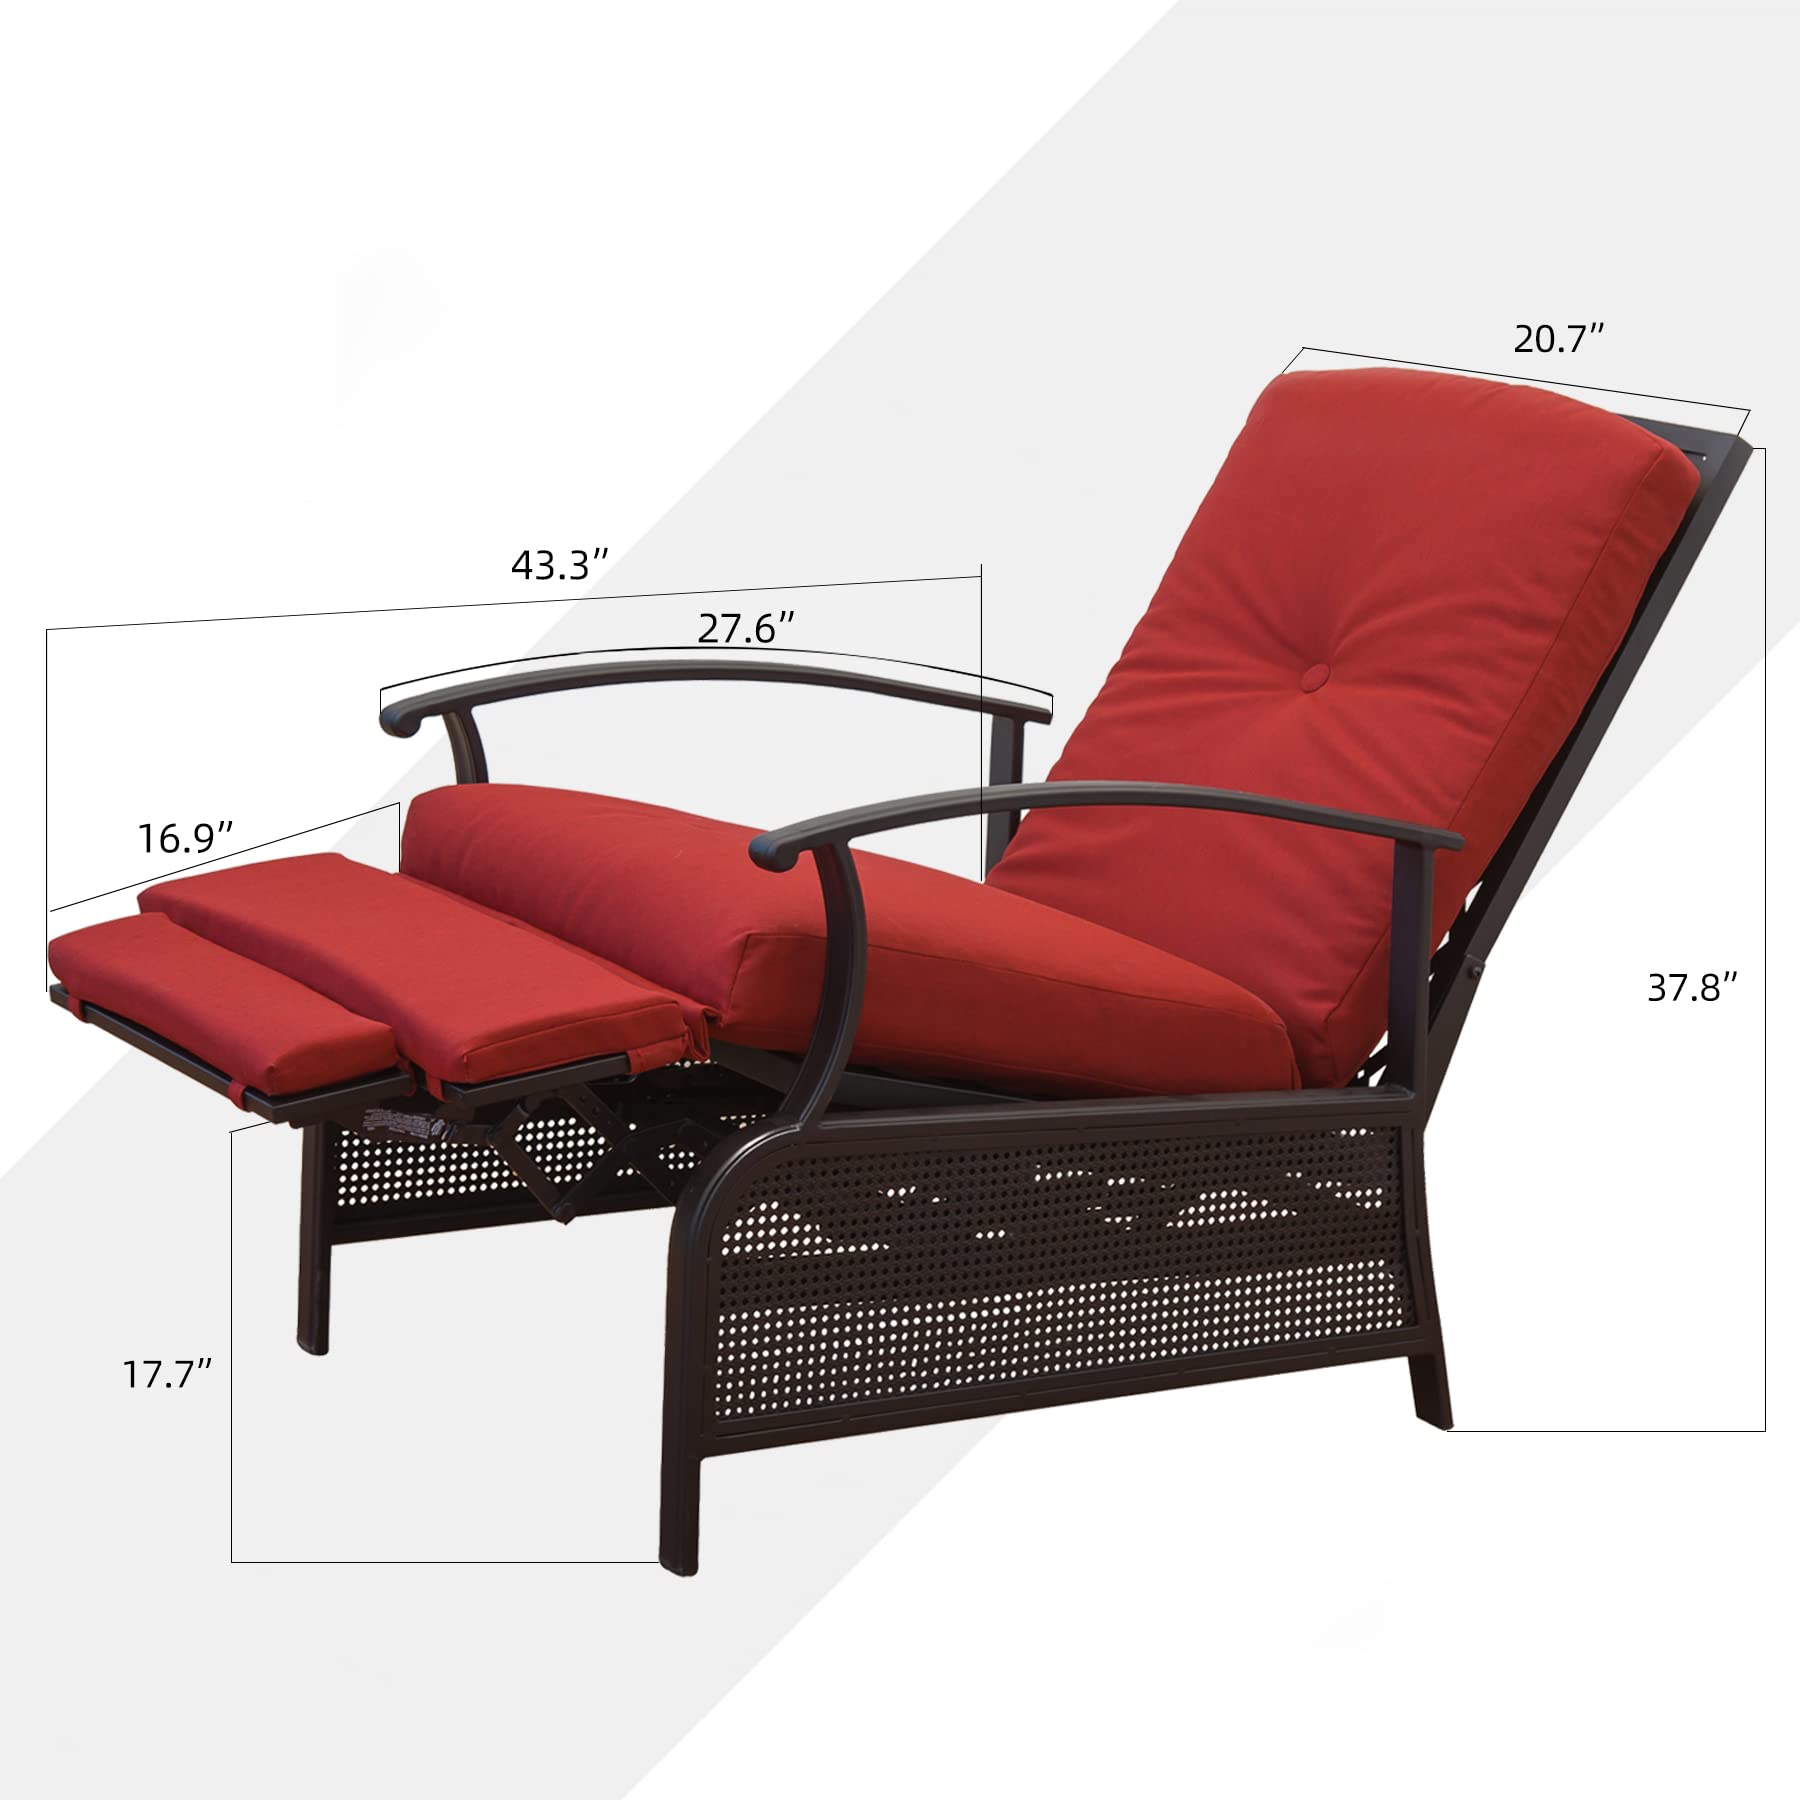 Domi Outdoor Living Adjustable Recliner Chair, Metal Reclining Lounge Chair, Remova Patio Chair - image 5 of 7